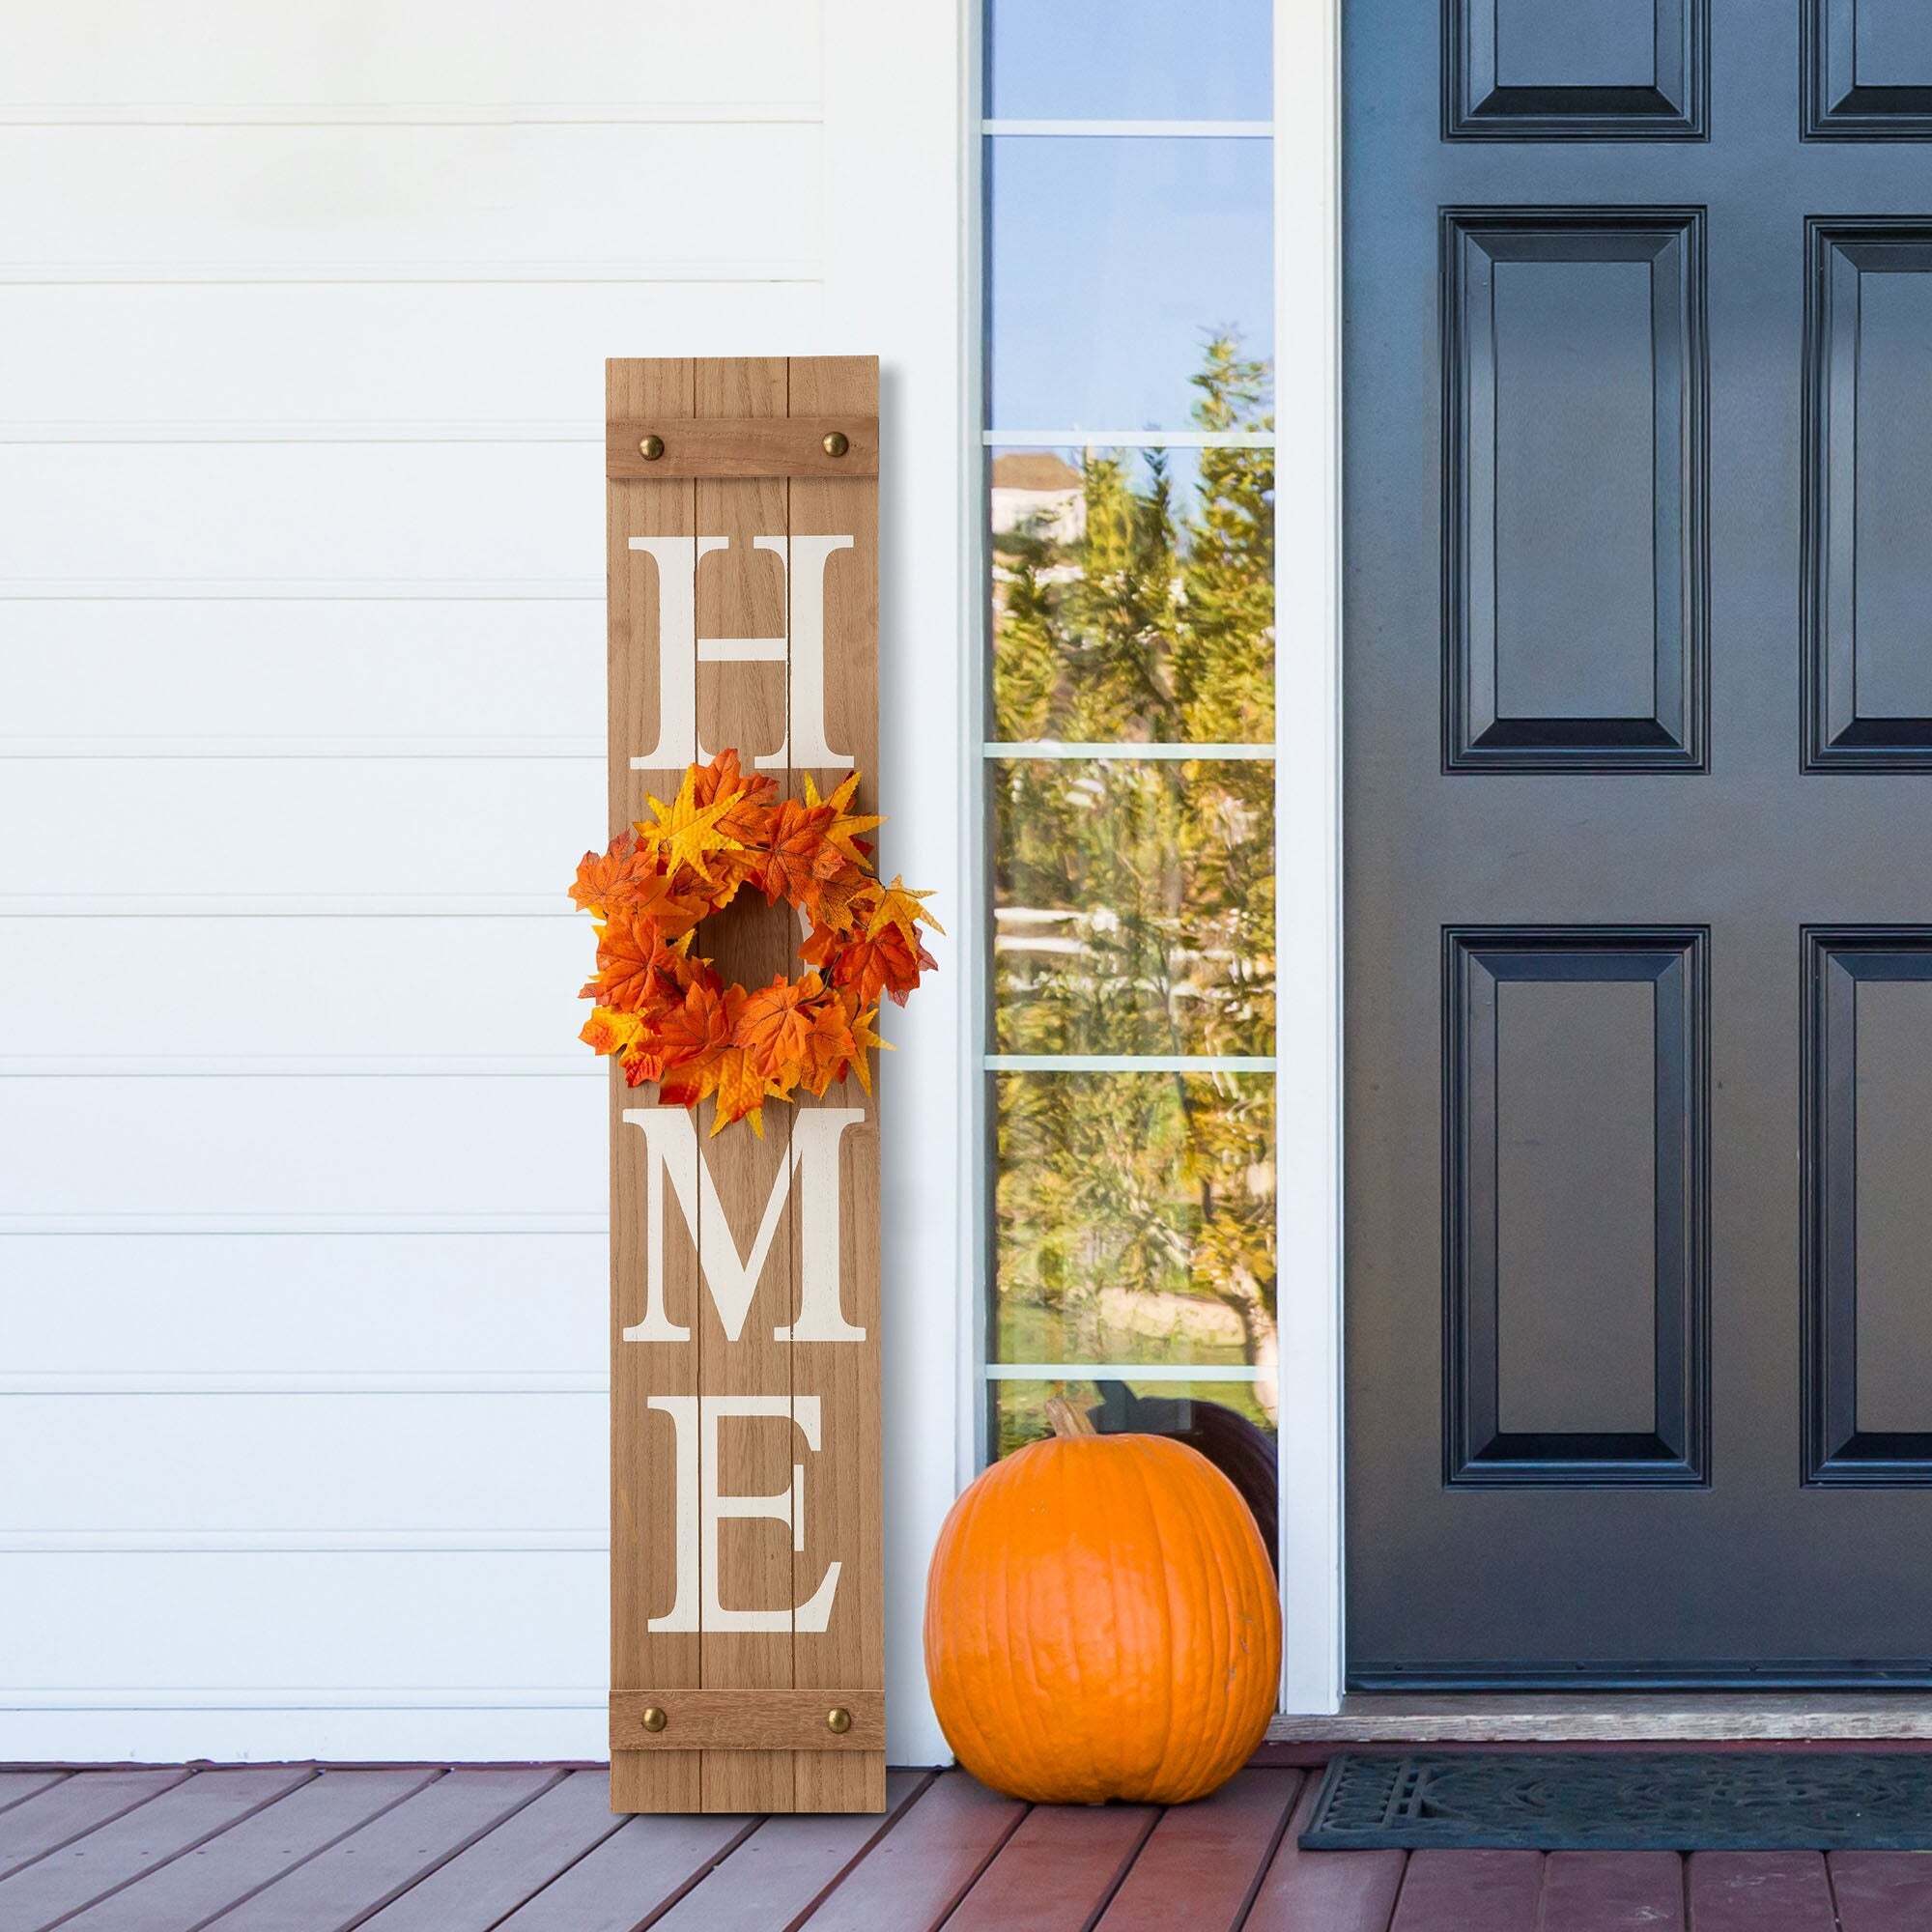 Welcoming Wooden ‘Home’ Porch Decor